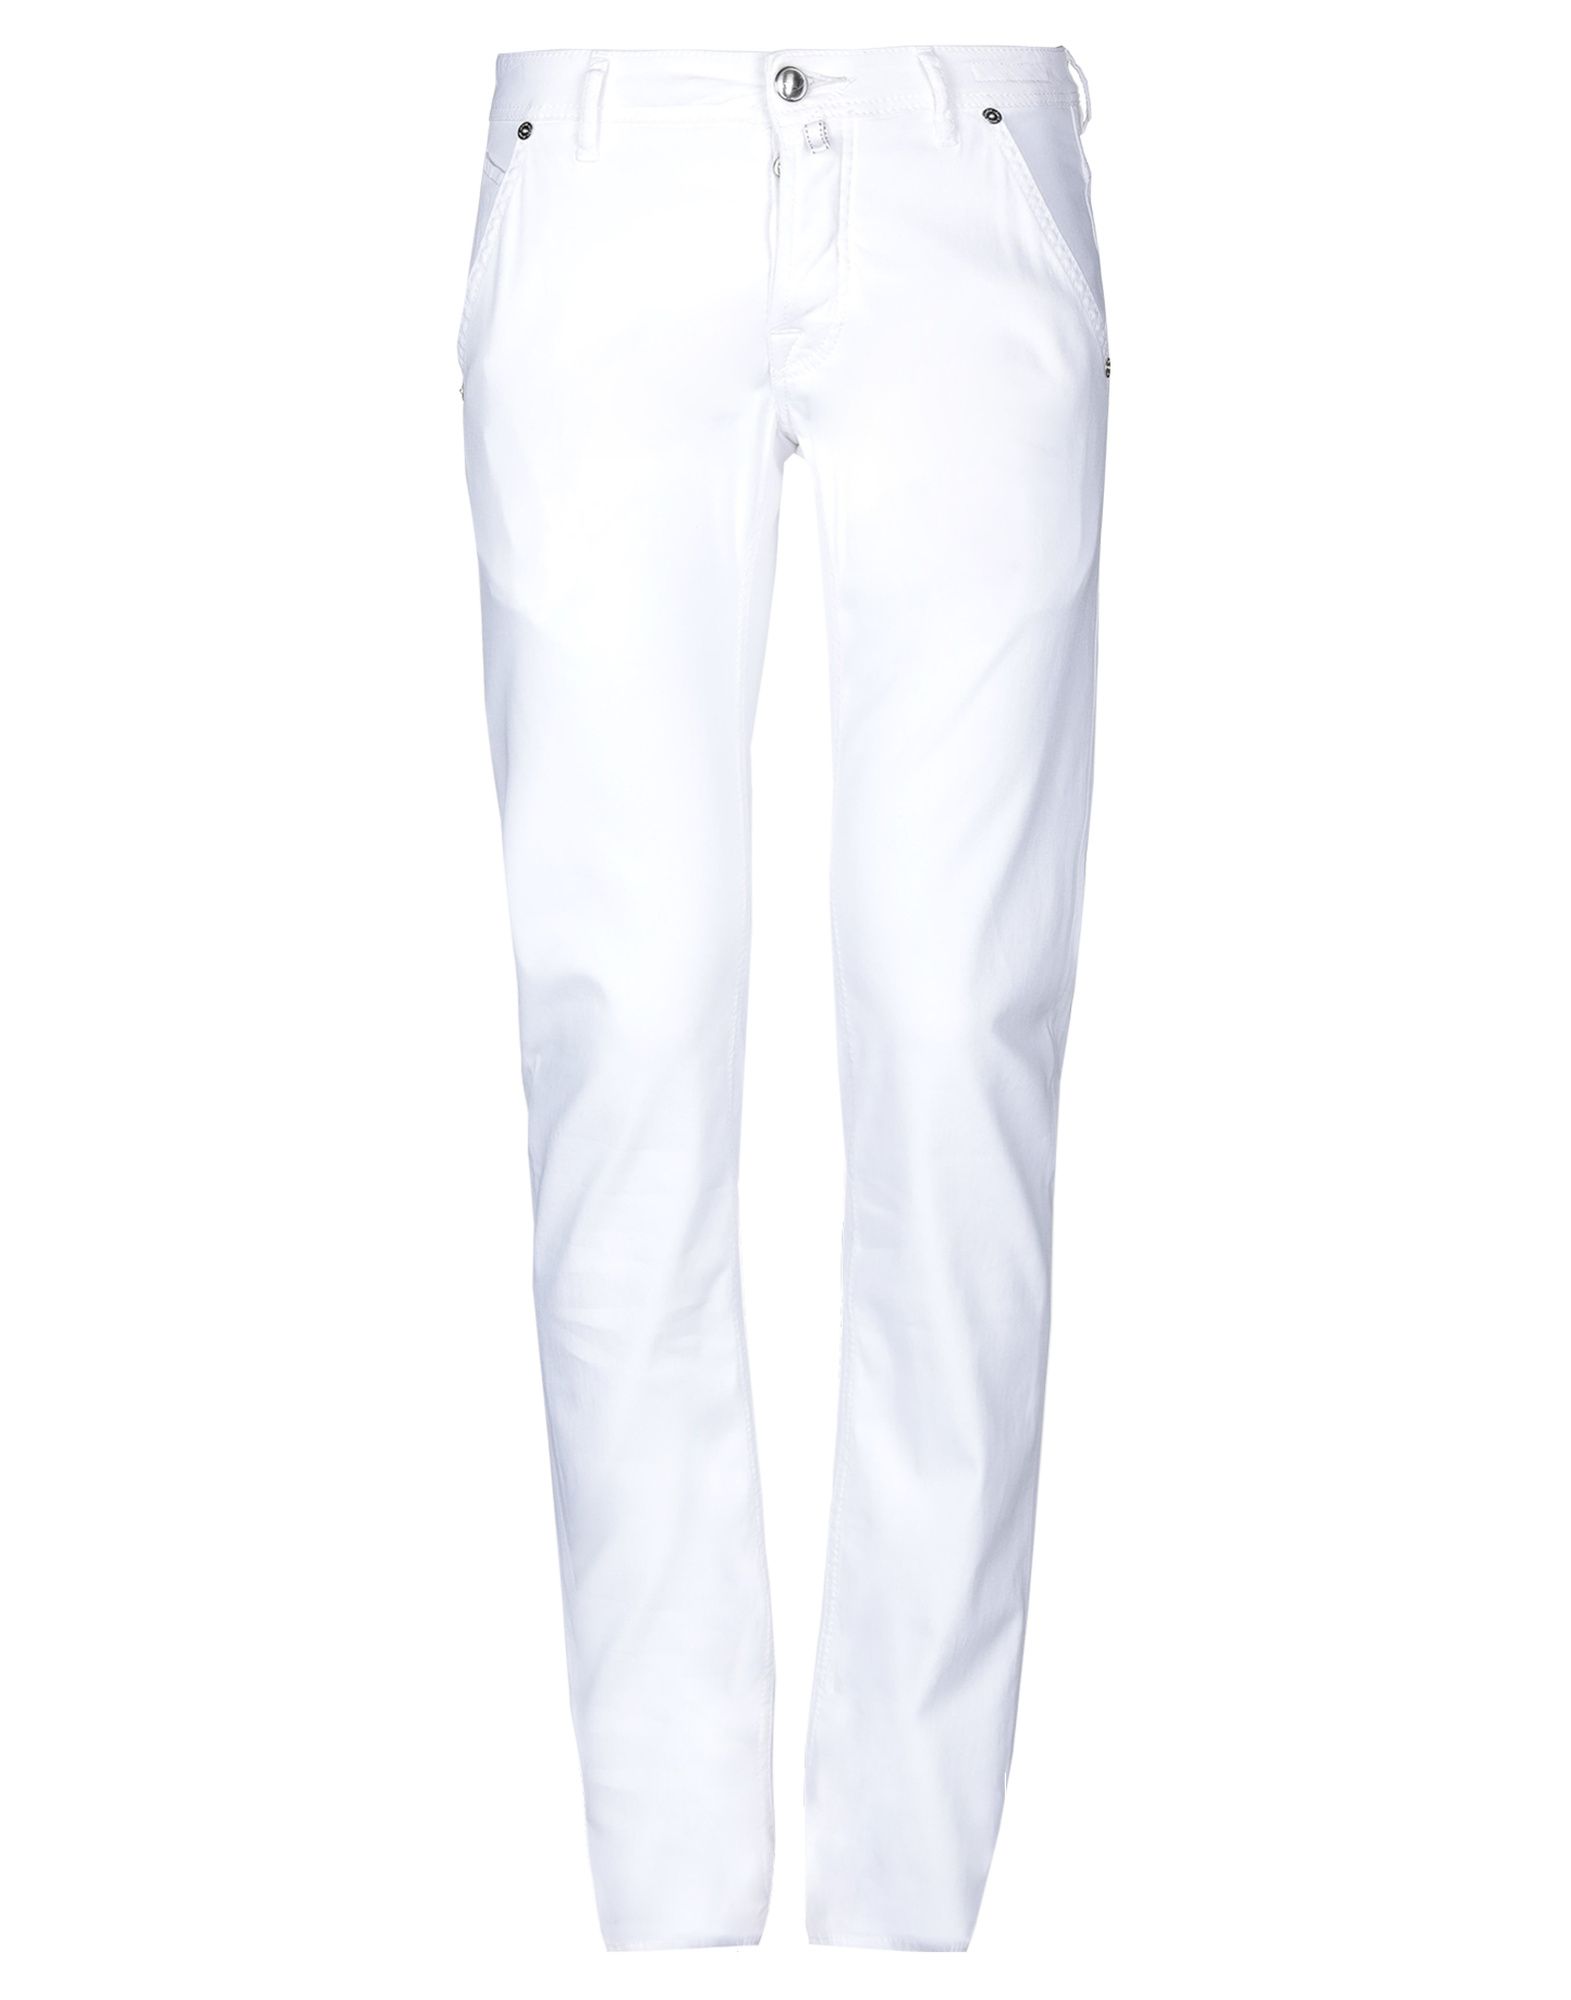 Jacob Cohёn Pants In White